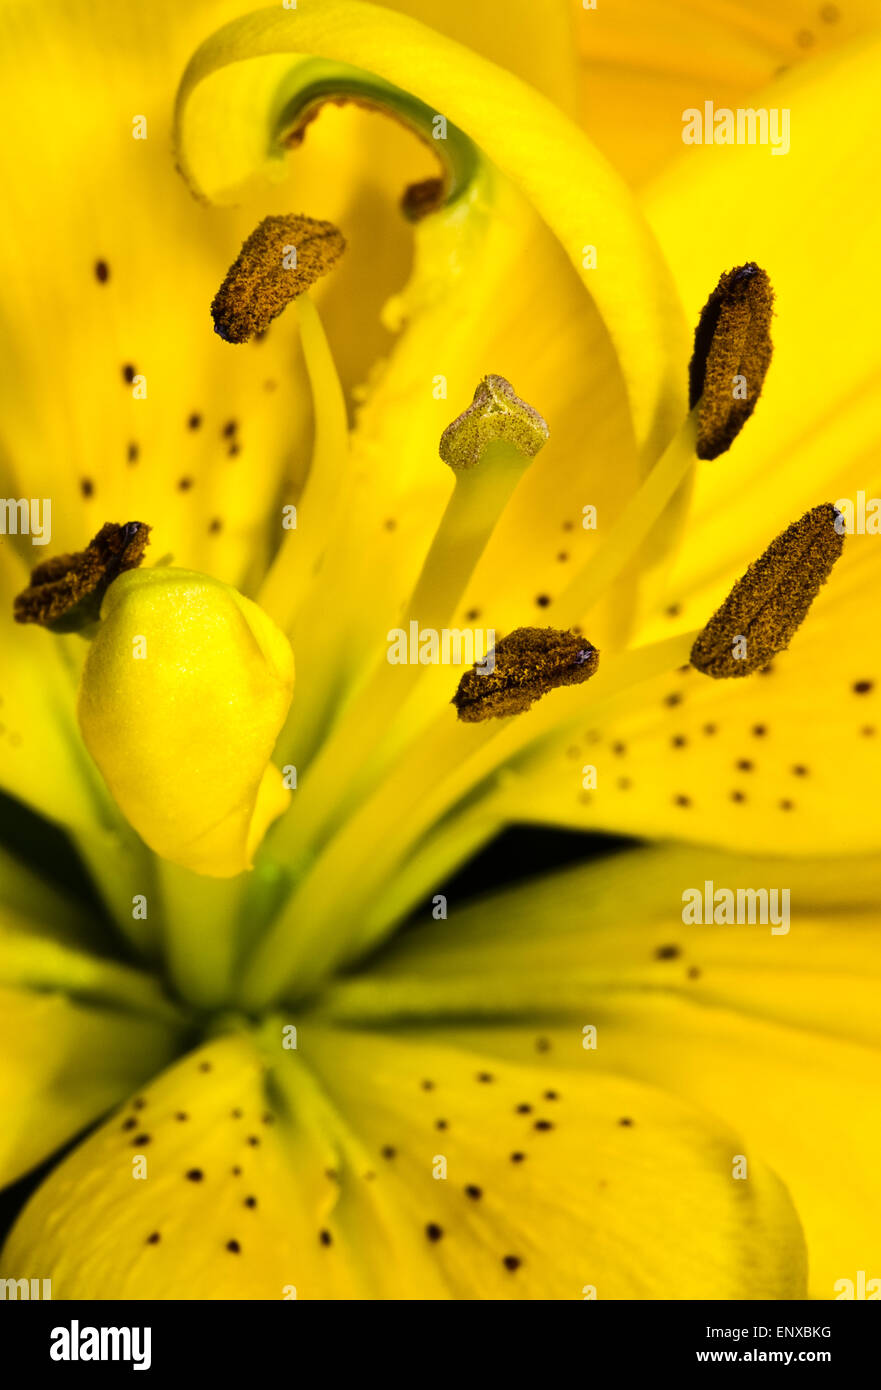 Calyx of a yellow Lily Stock Photo